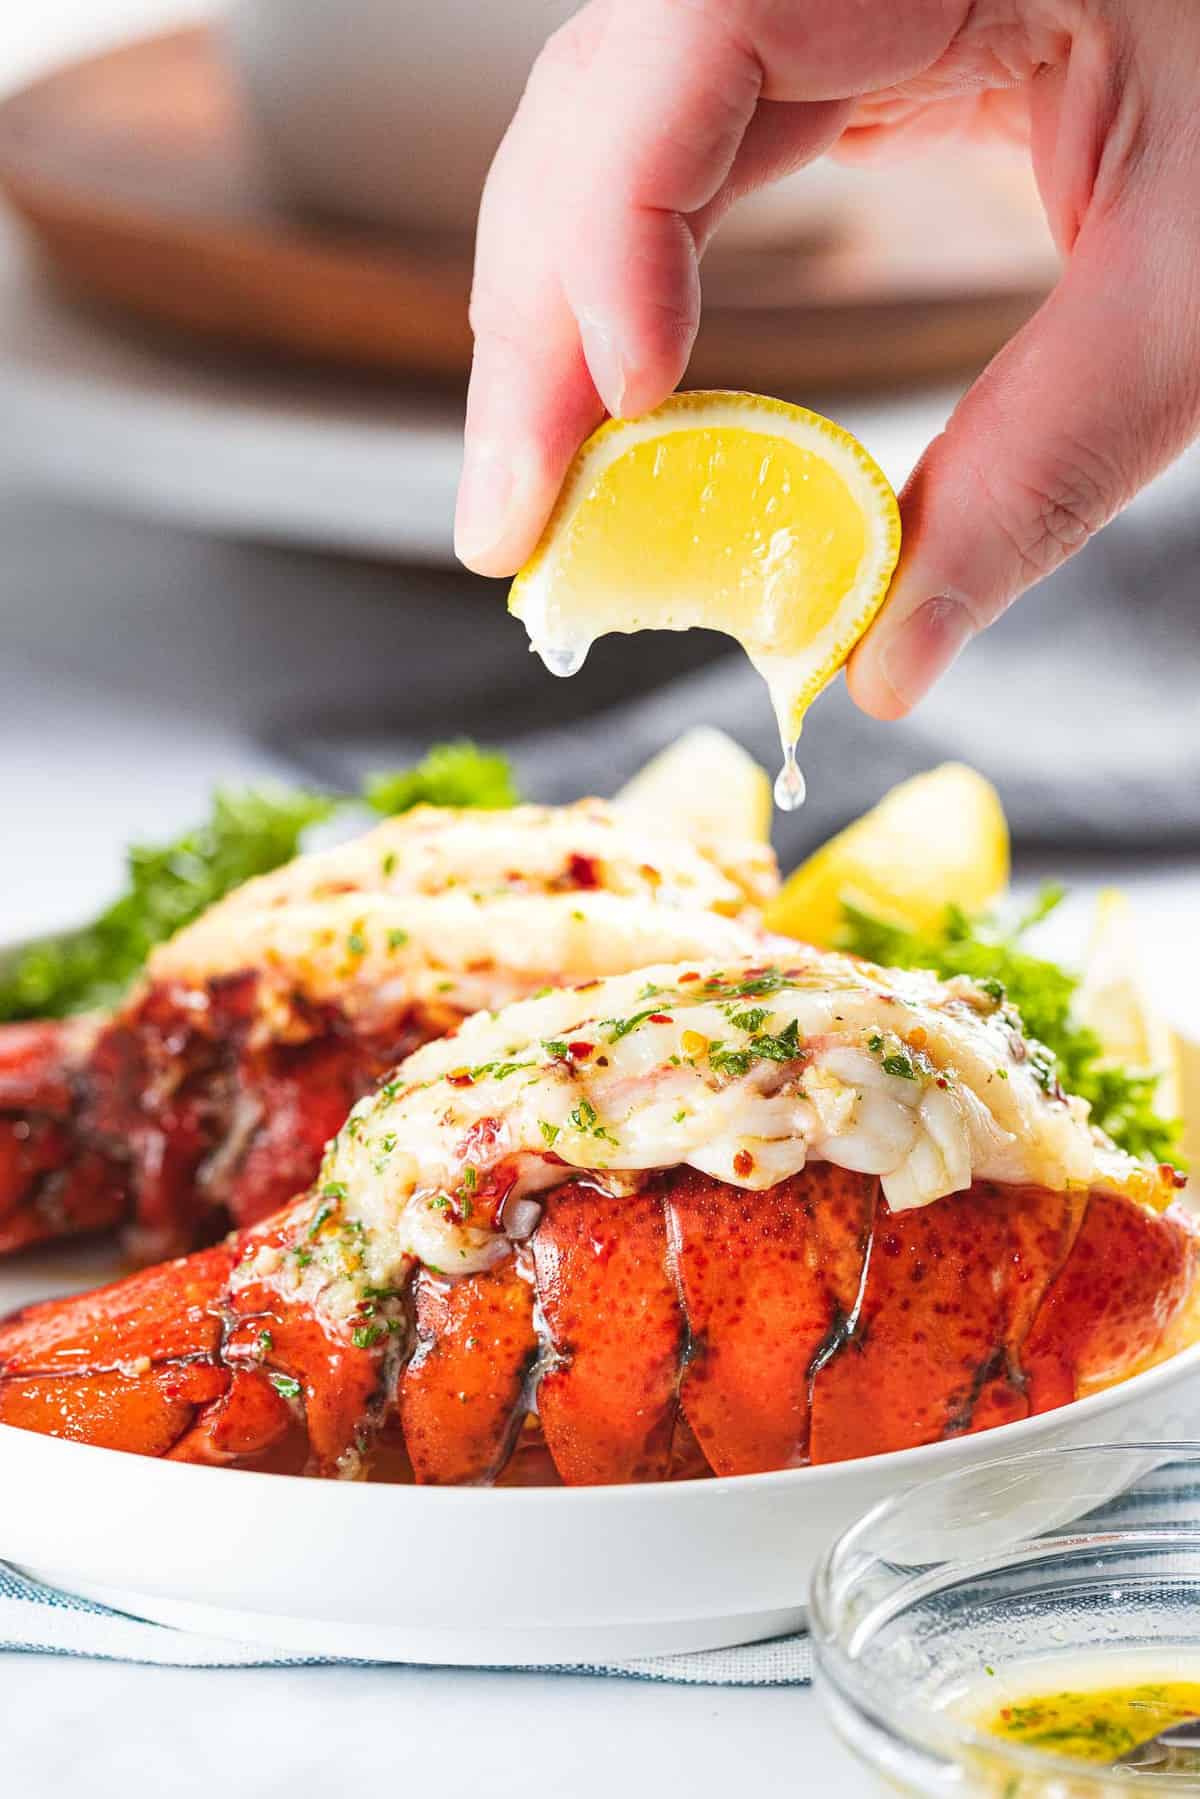 Broiled lobster tail with lemon juice squeezed on top.